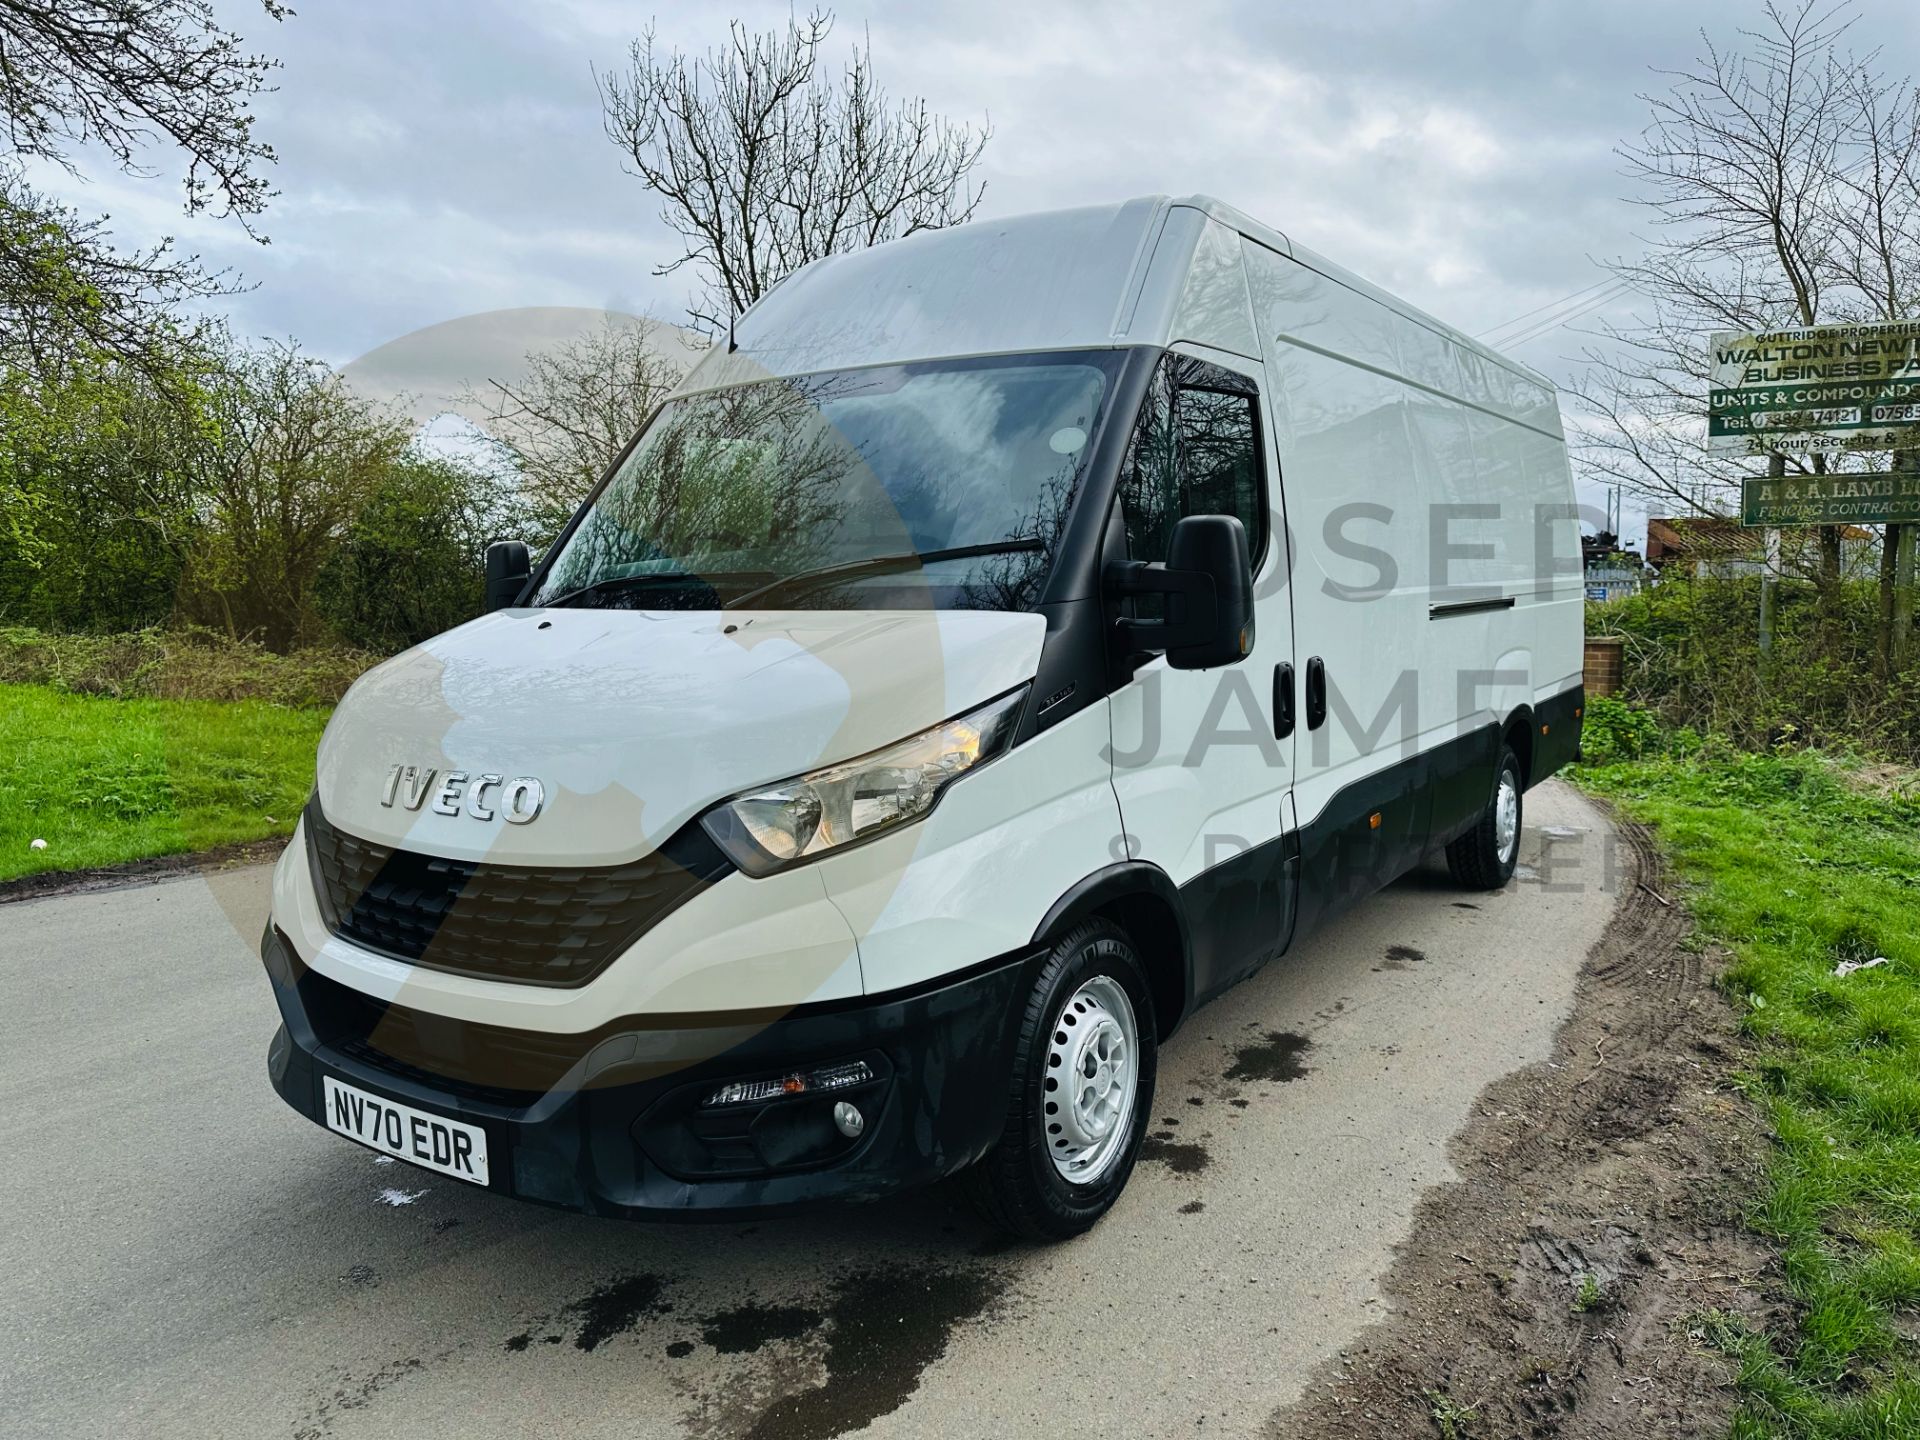 IVECO DAILY 35-140 LONG WHEEL BASE HIFG ROOF - 2021 REG (NEW SHAPE) ONLY 85K MILES - AIR CON - LOOK! - Image 4 of 30